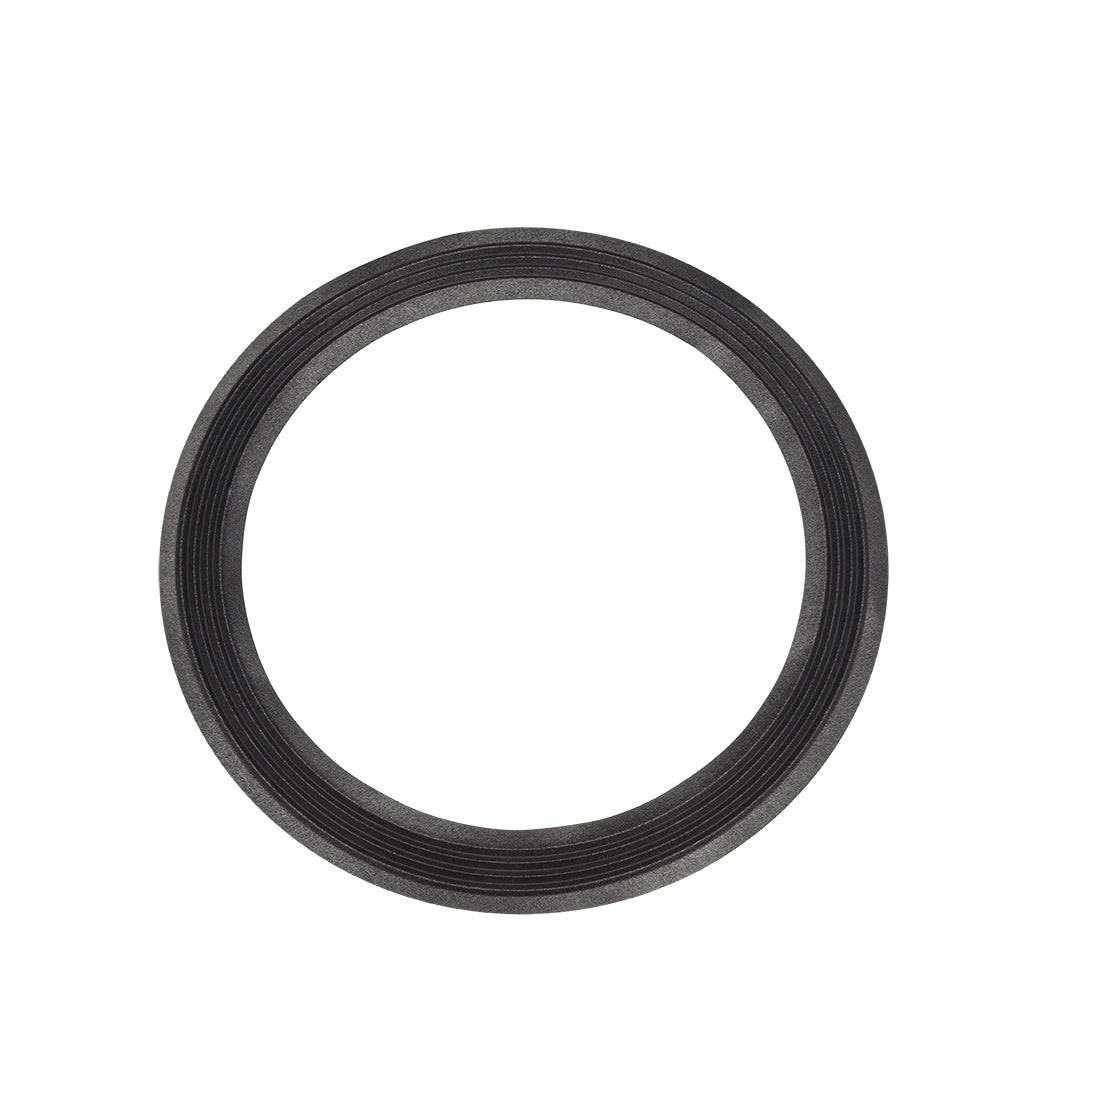 uxcell Uxcell 12 inch Speaker Cloth Edge Surround Rings Replacement Part for Speaker Repair or DIY